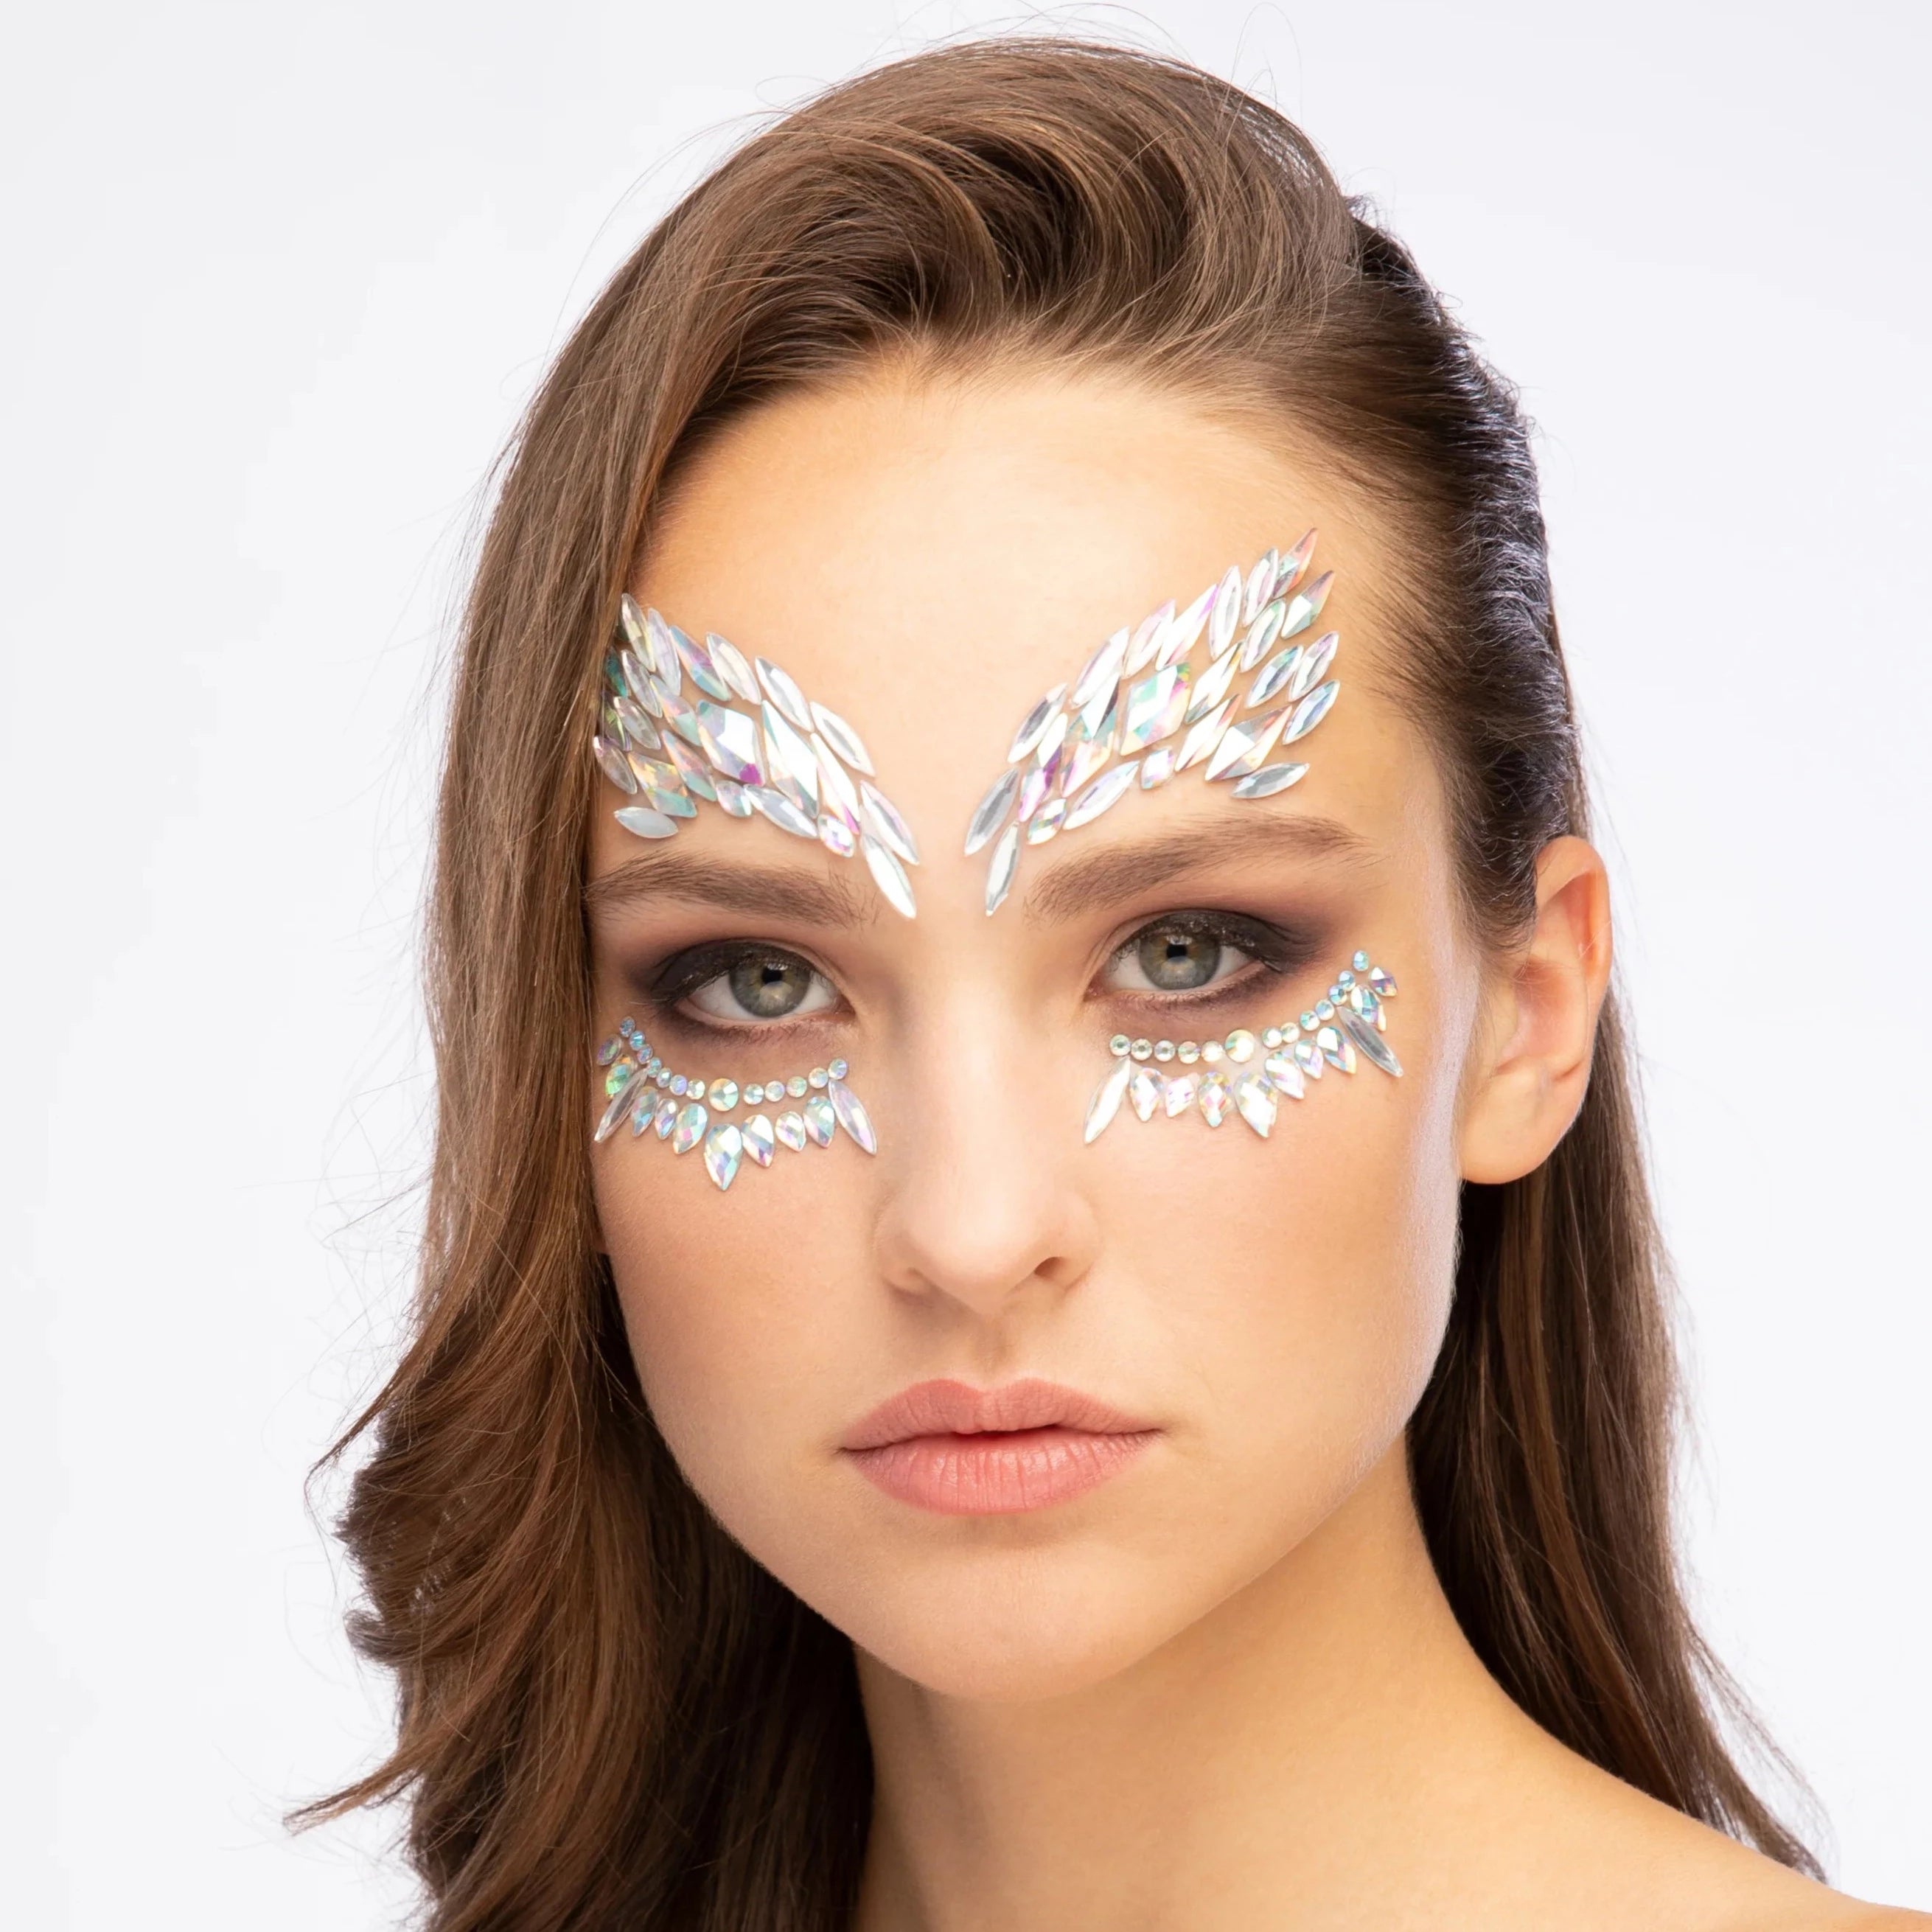 Model wearing Moon Creations Glitter Face Jewels in Show Girl